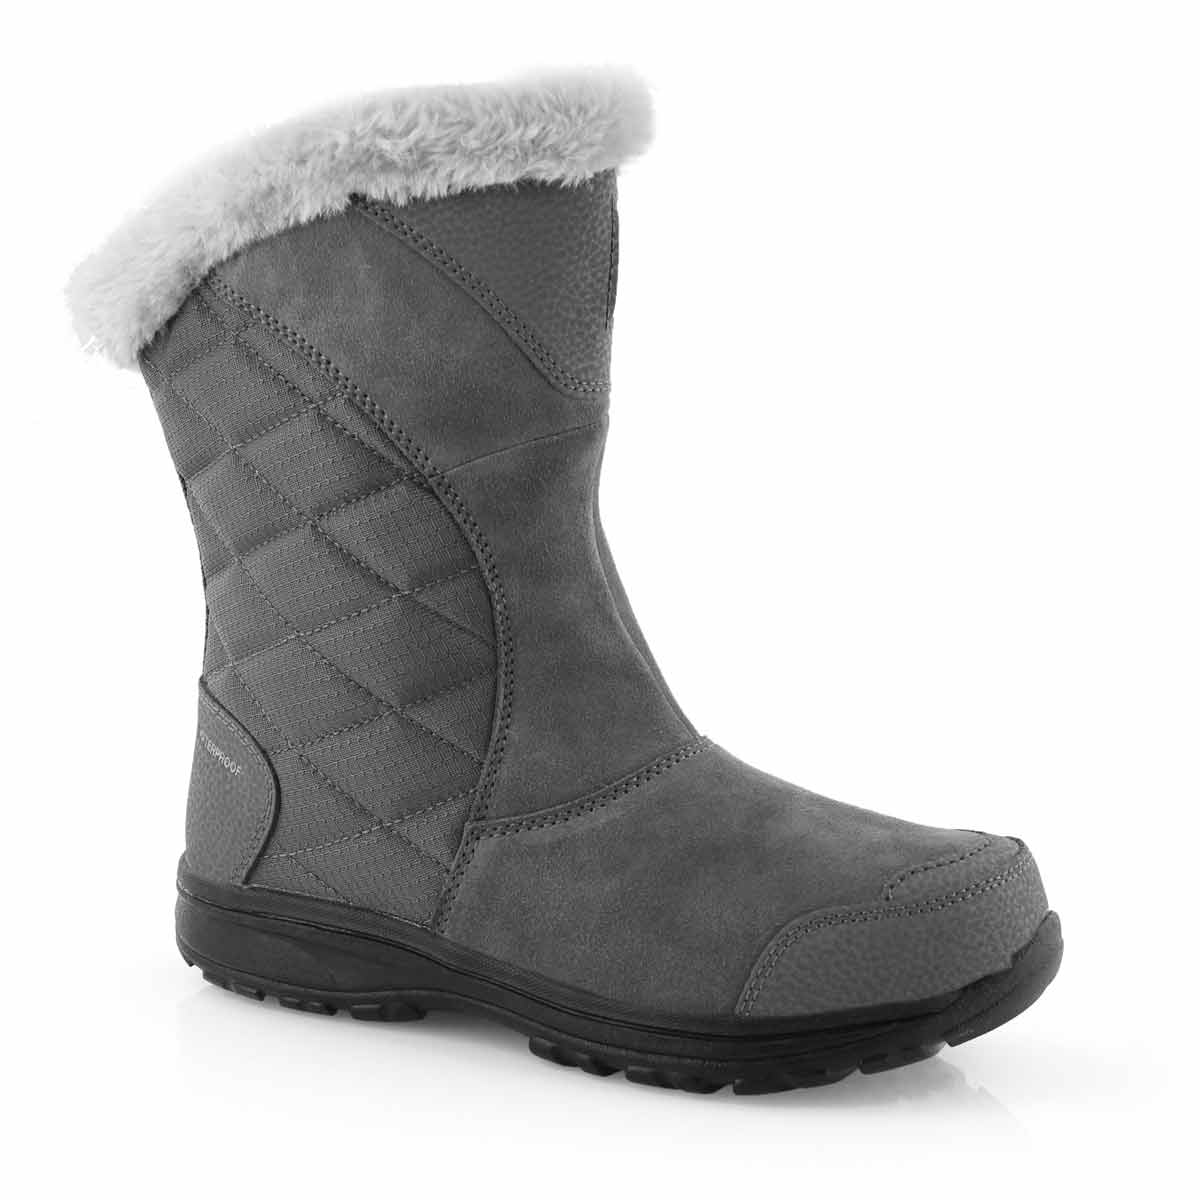 softmoc winter boots sale